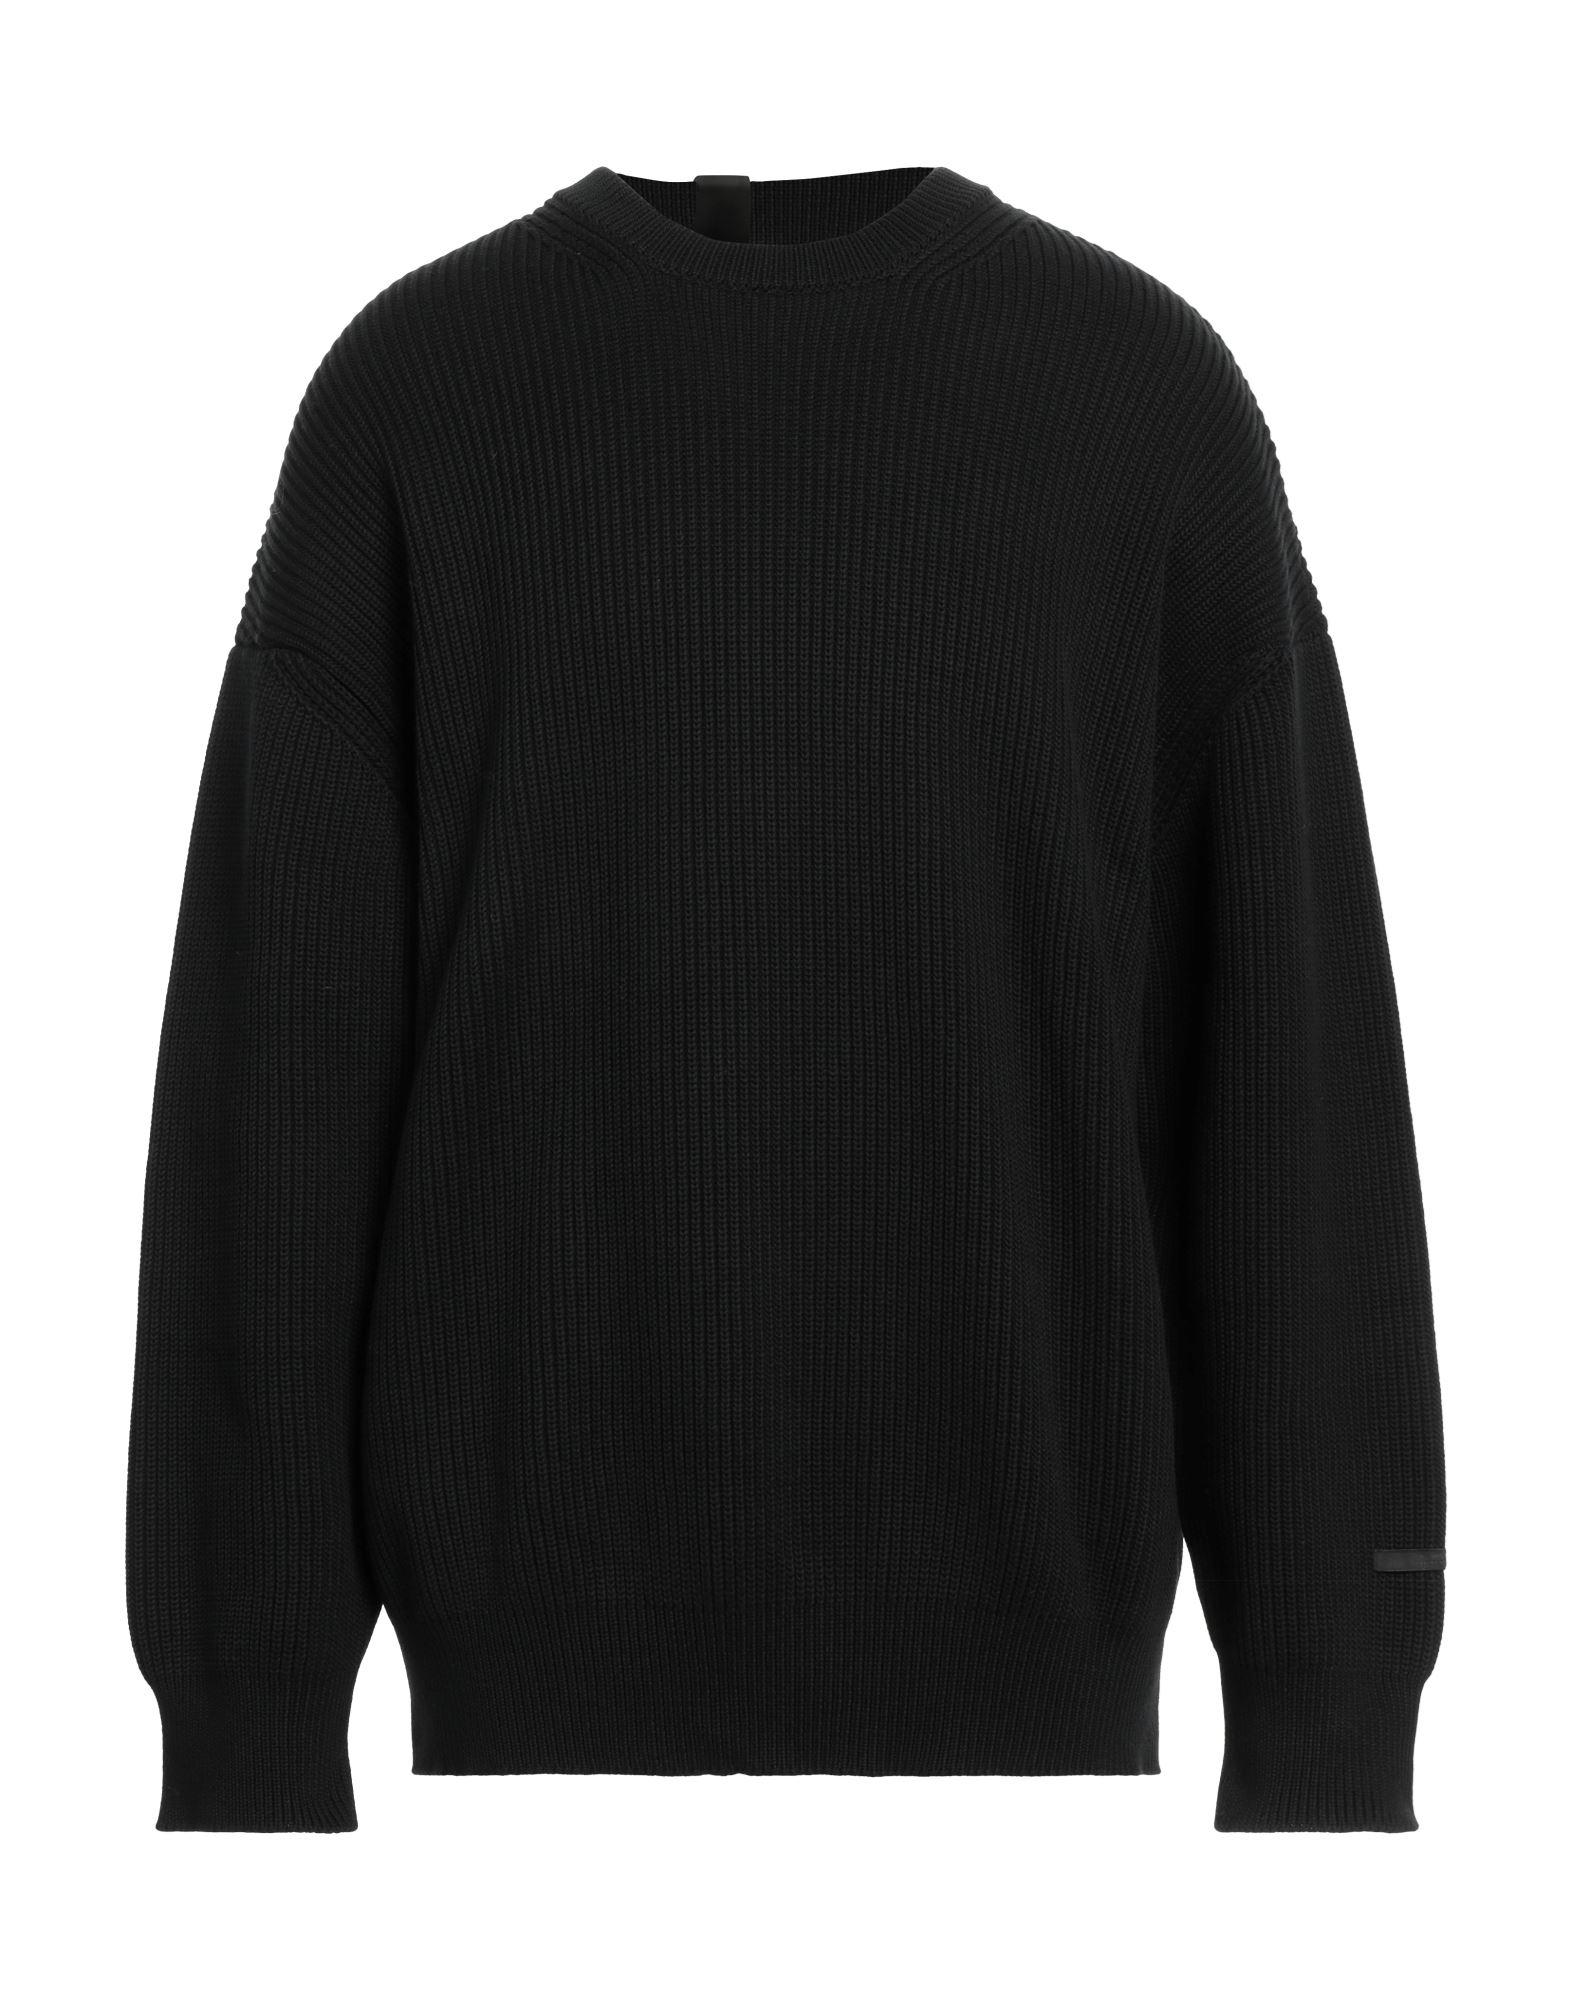 N. Hoolywood Sweater in Black for Men | Lyst